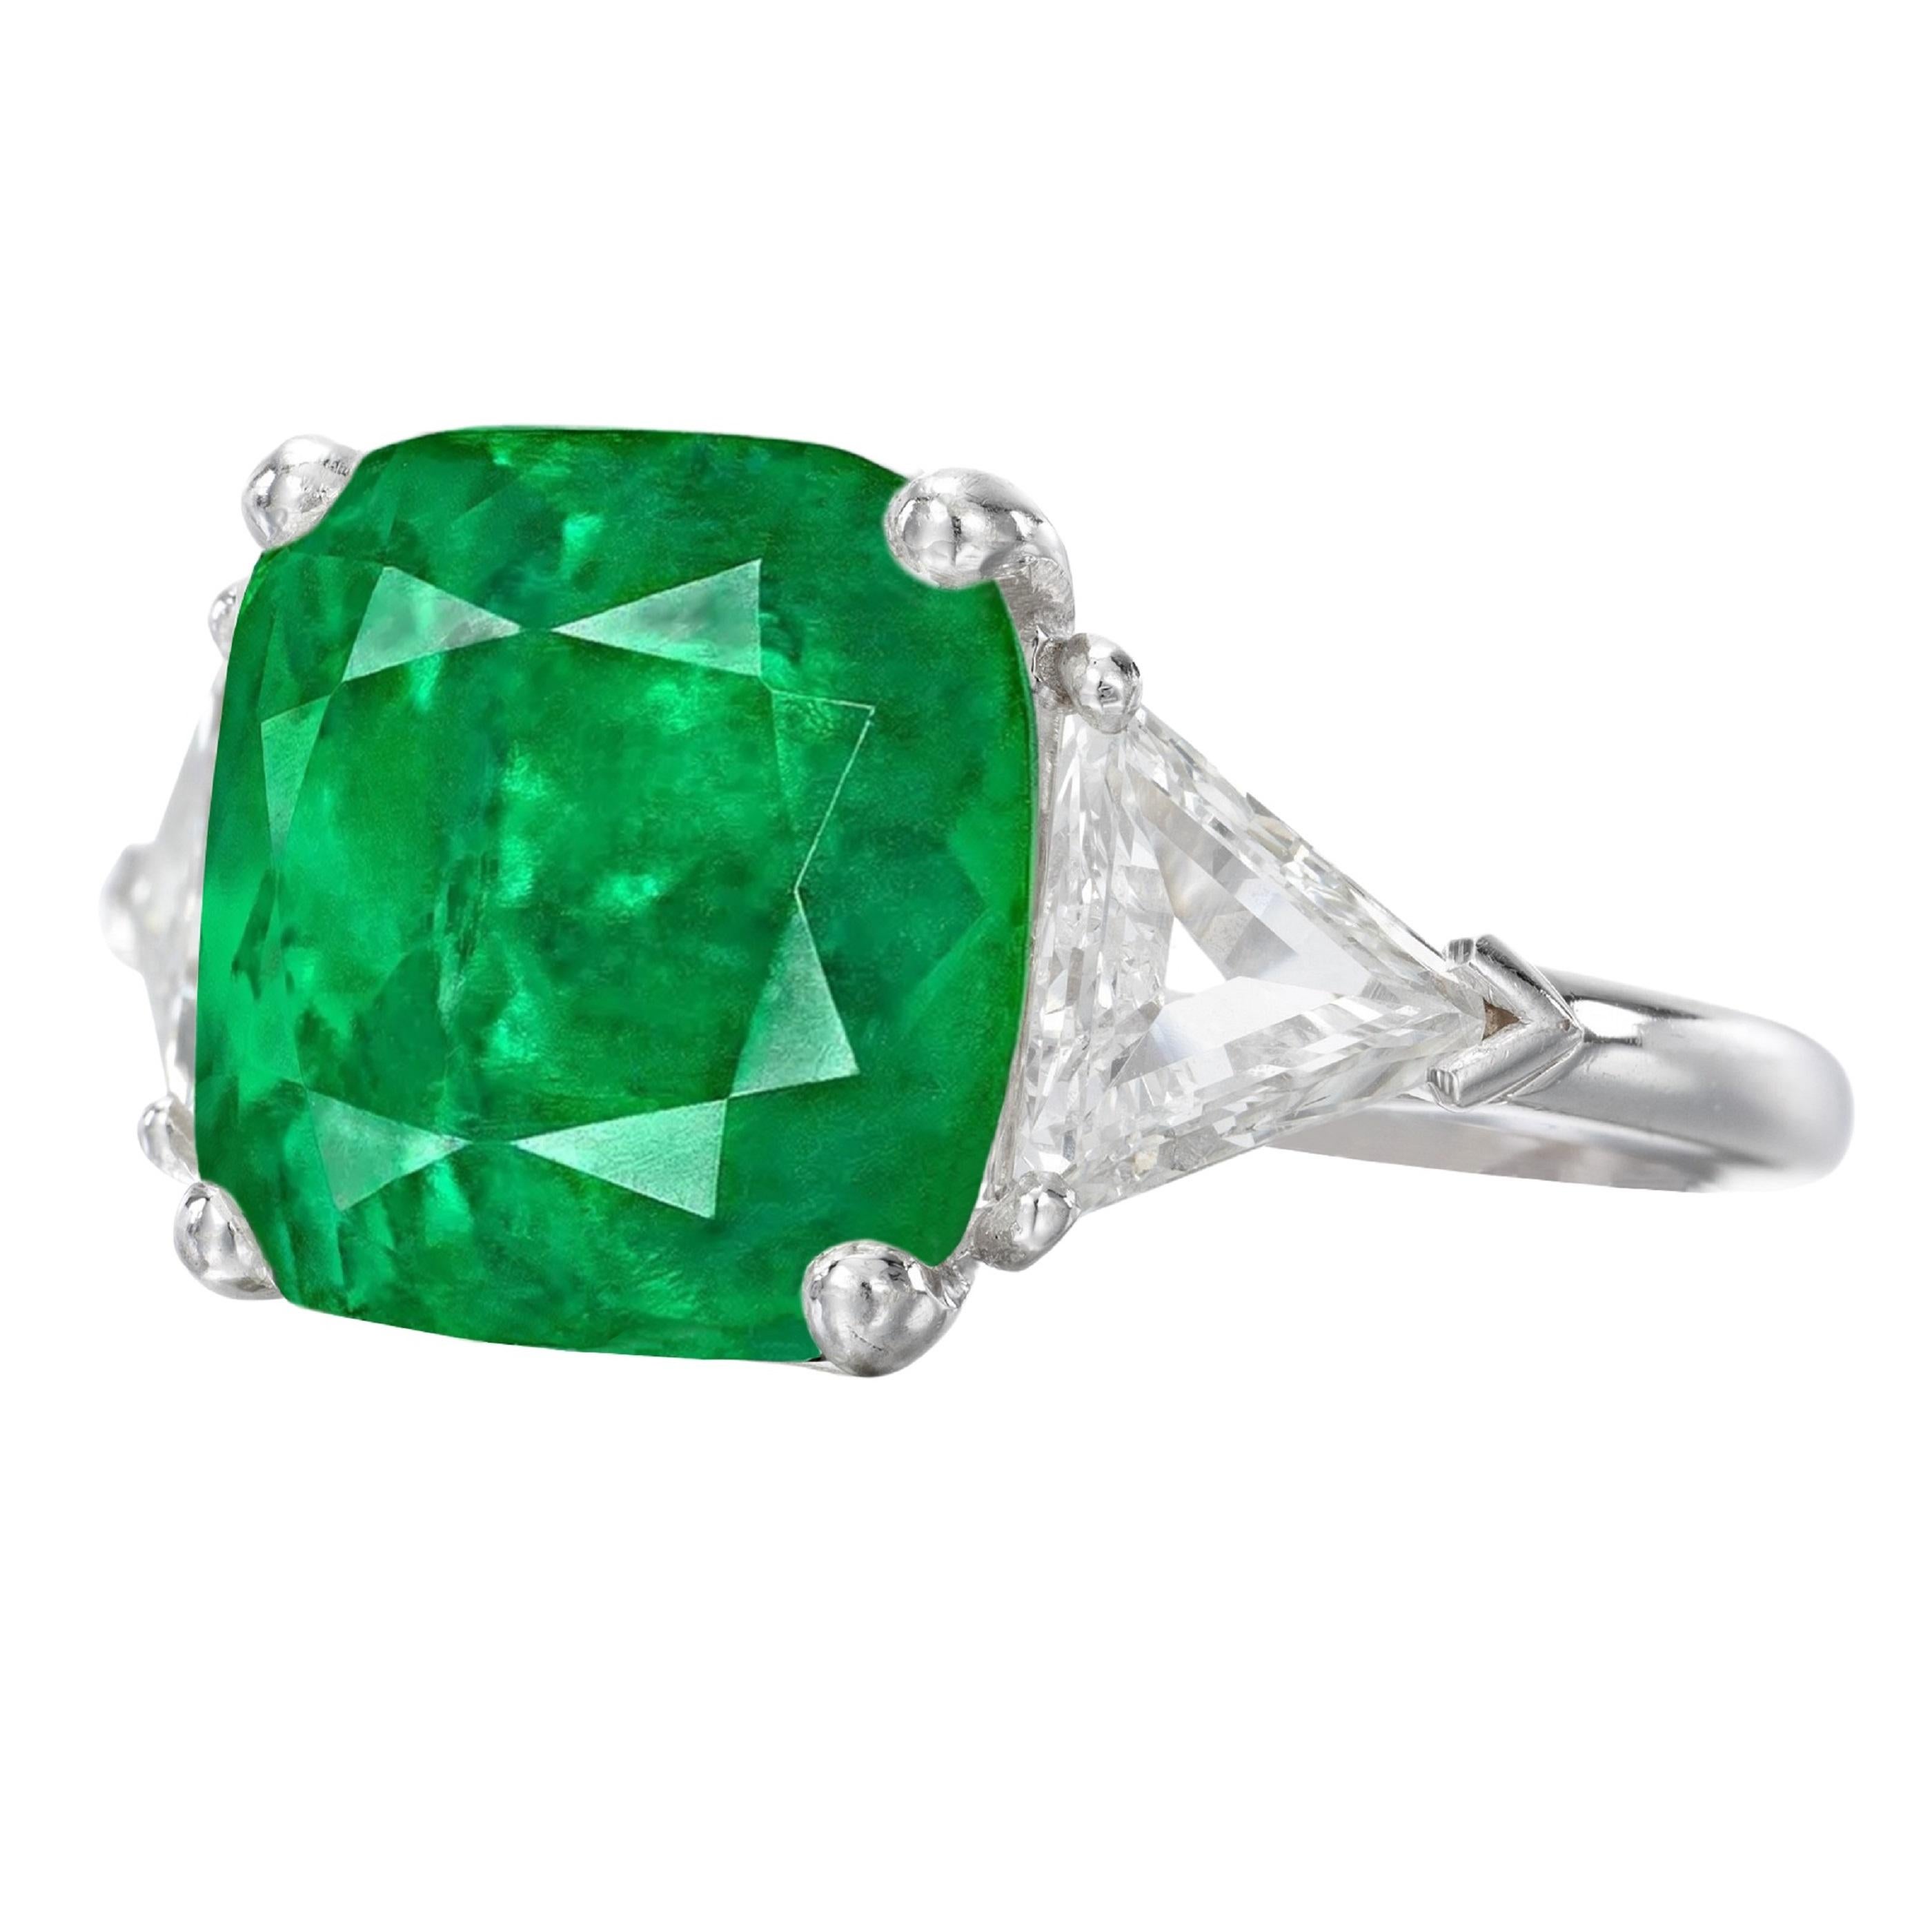 Exquisite ring by  Antinori di Sanpietro Roma three-stone ring's center stone is a 3.28 carat Colombian minor oil emerald has been certified by a GRS Switzerland. Is a Colombian Emerald with minor oil enhacement.

The emerald is surrounded by a